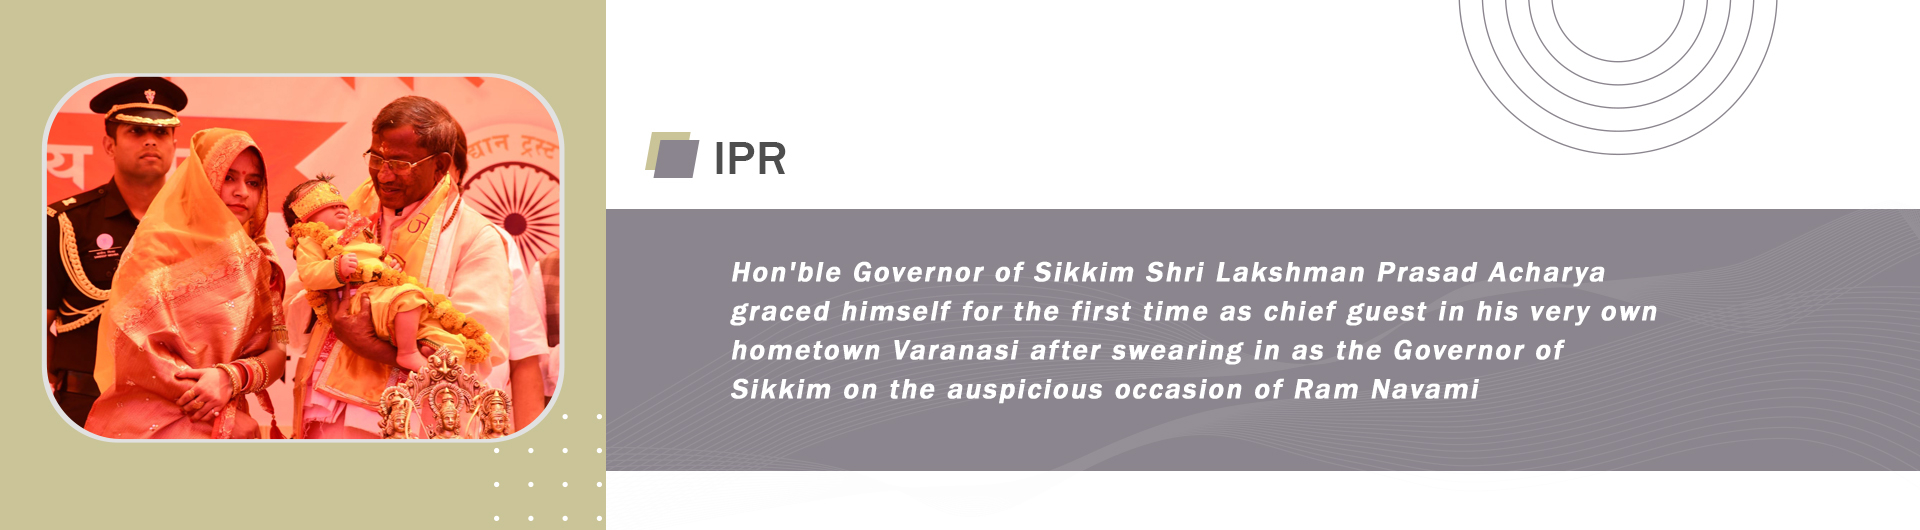 Hon'ble Governor of Sikkim Shri Lakshman Prasad Acharya graced himself for the first time as chief guest in his very own hometown Varanasi after swearing in as the Governor of Sikkim on the auspicious occasion of Ram Navami